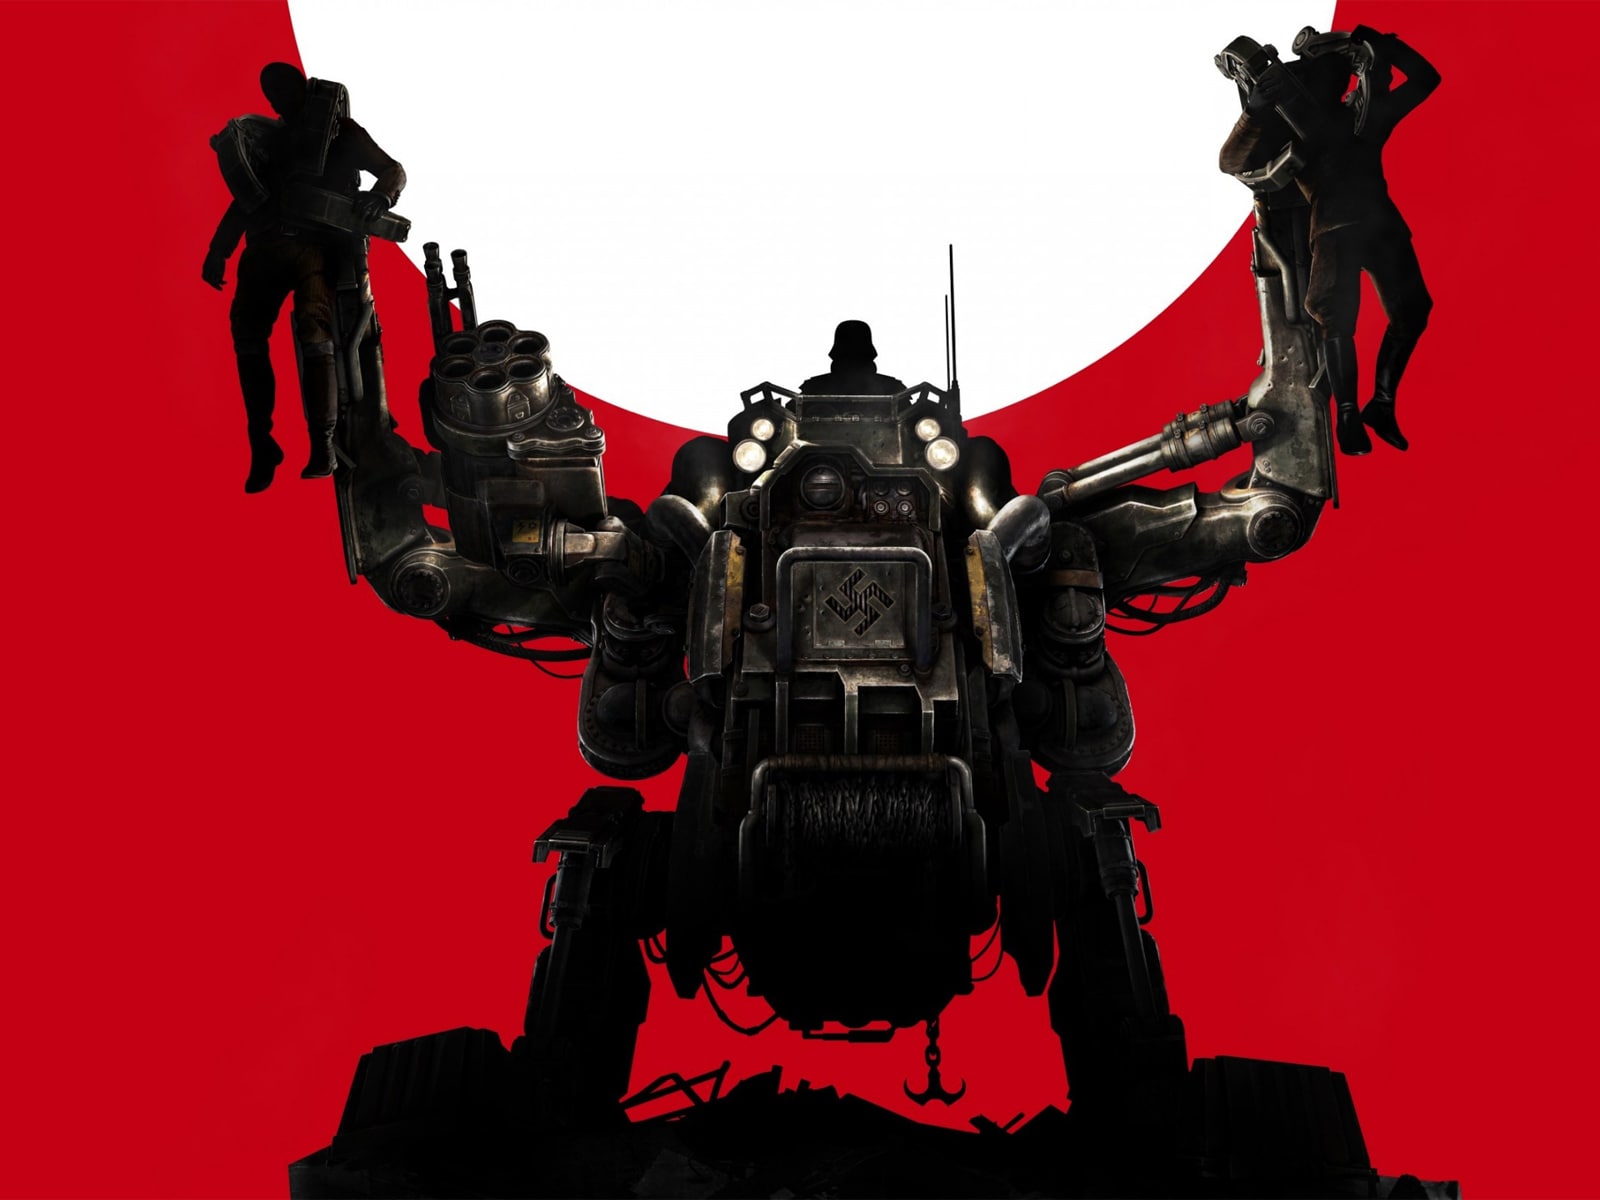 Wolfenstein: The New Order - How to Solve All the Enigma Codes